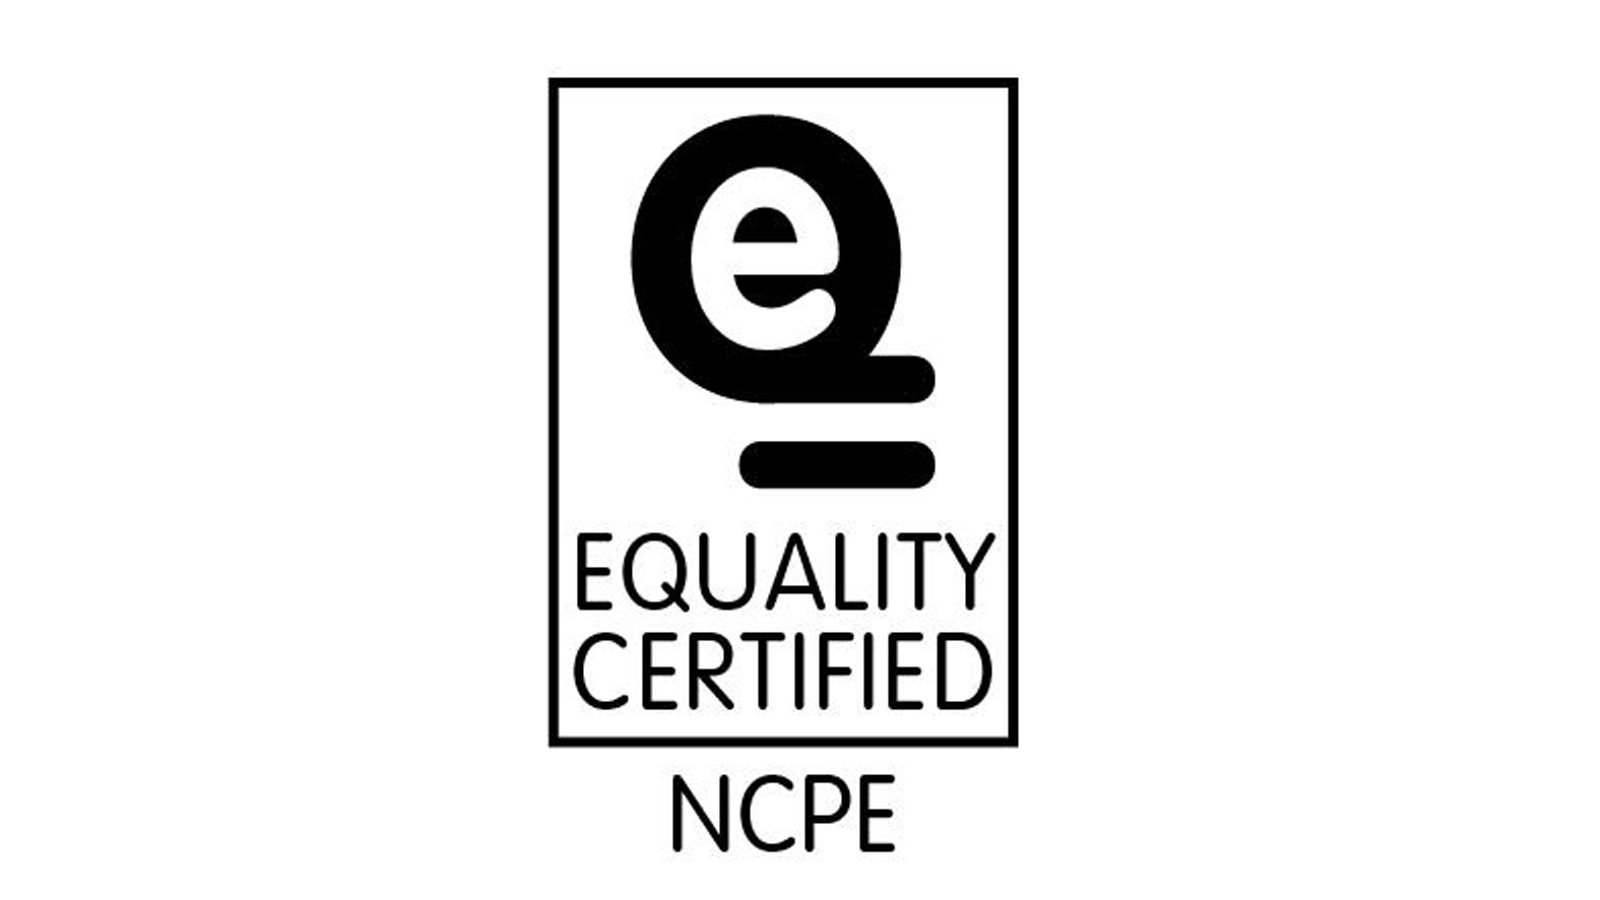 Simonds Farsons Cisk plc re-certified with NCPE Equality Mark 